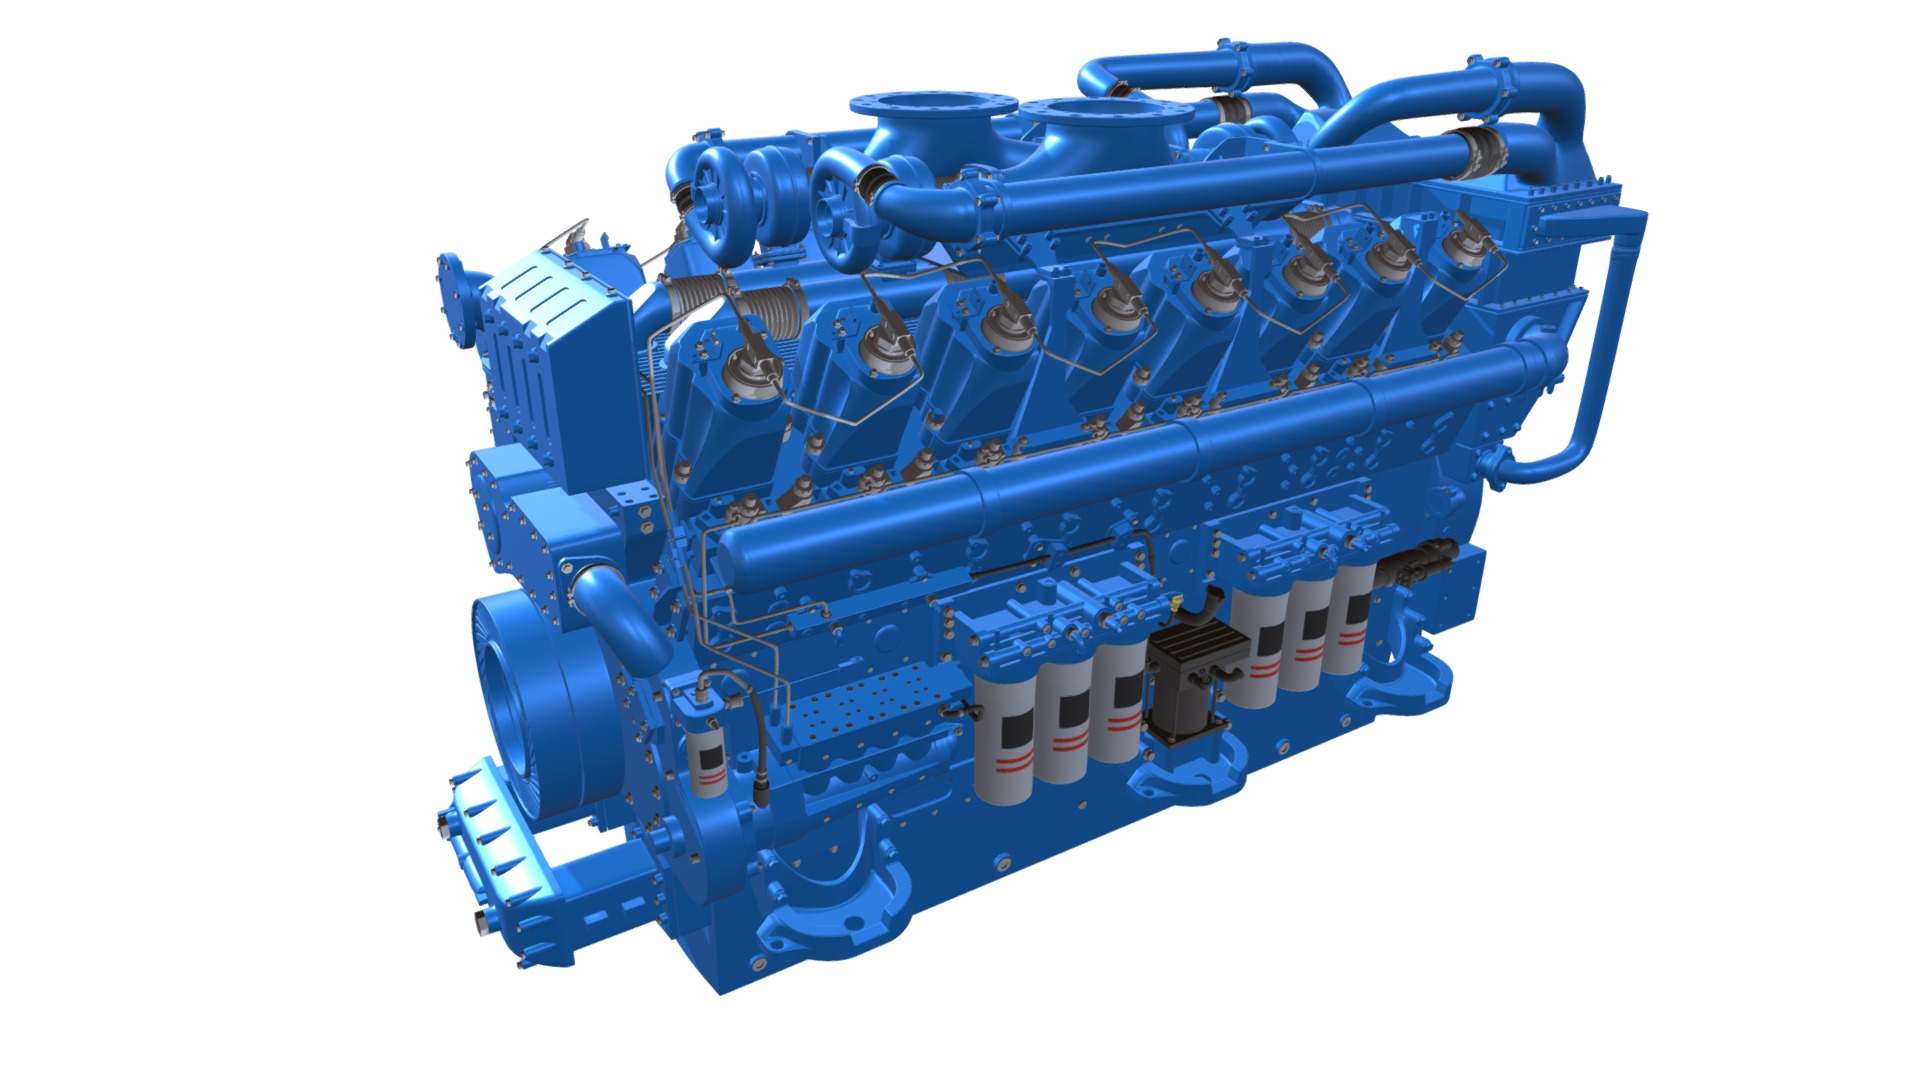 3D model V16 Engine - This is a 3D model of the V16 Engine. The 3D model is about a blue and black machine.